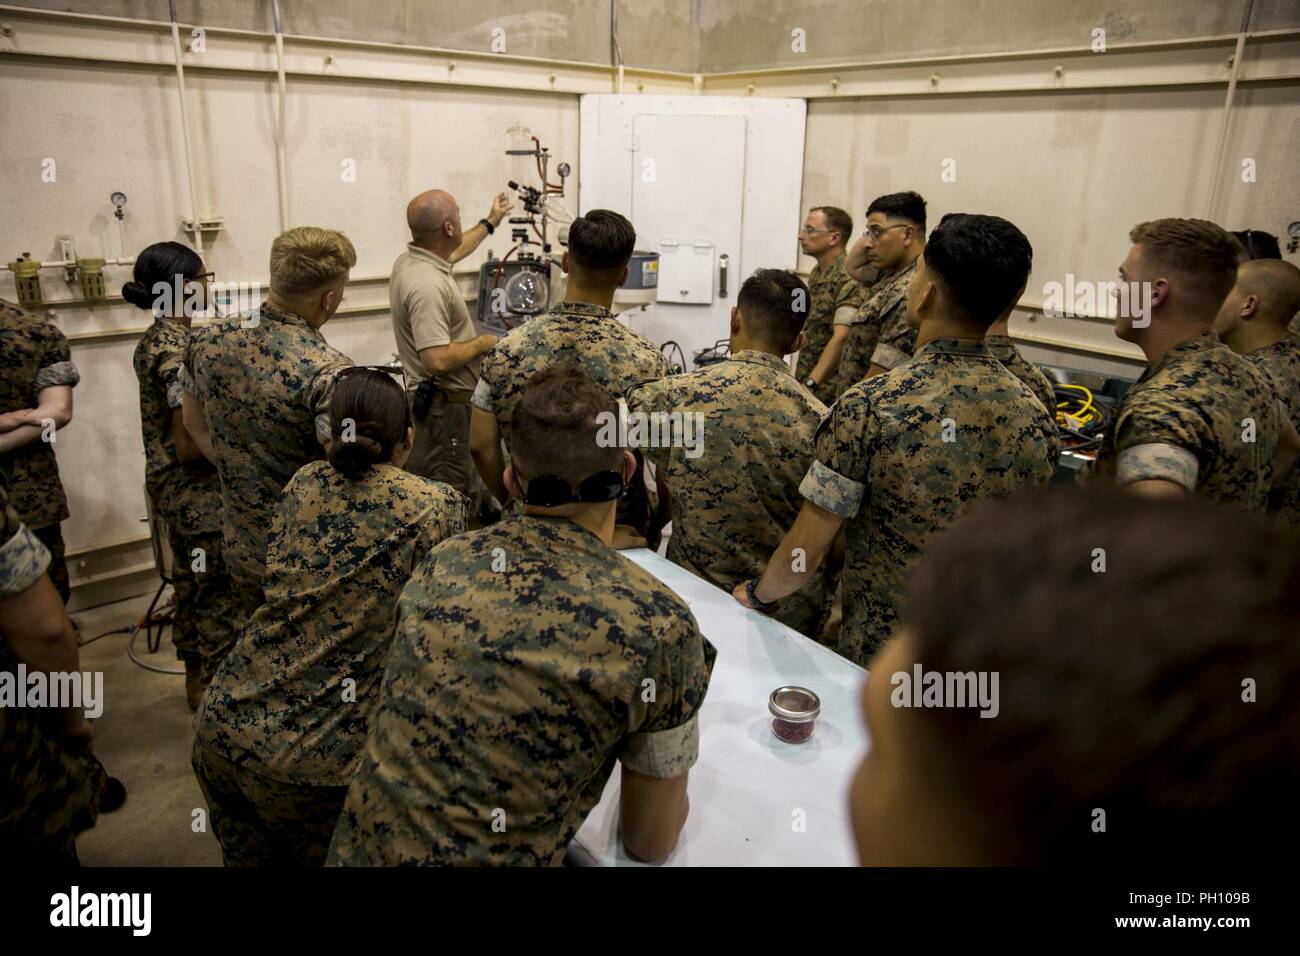 U.S. Marines with Chemical, Biological, Radiological, and Nuclear (CBRN) Platoon, Headquarters Battalion, 1st Marine Division, are briefed during the Concept of Real World CBRN Operations course at the Guardian Centers in Perry, Georgia, June 20, 2018. This training was conducted to enhance and refine the conduct of sensitive site exploitation, which supports the commander’s decision making cycle and maintains momentum during combat operations. Stock Photo